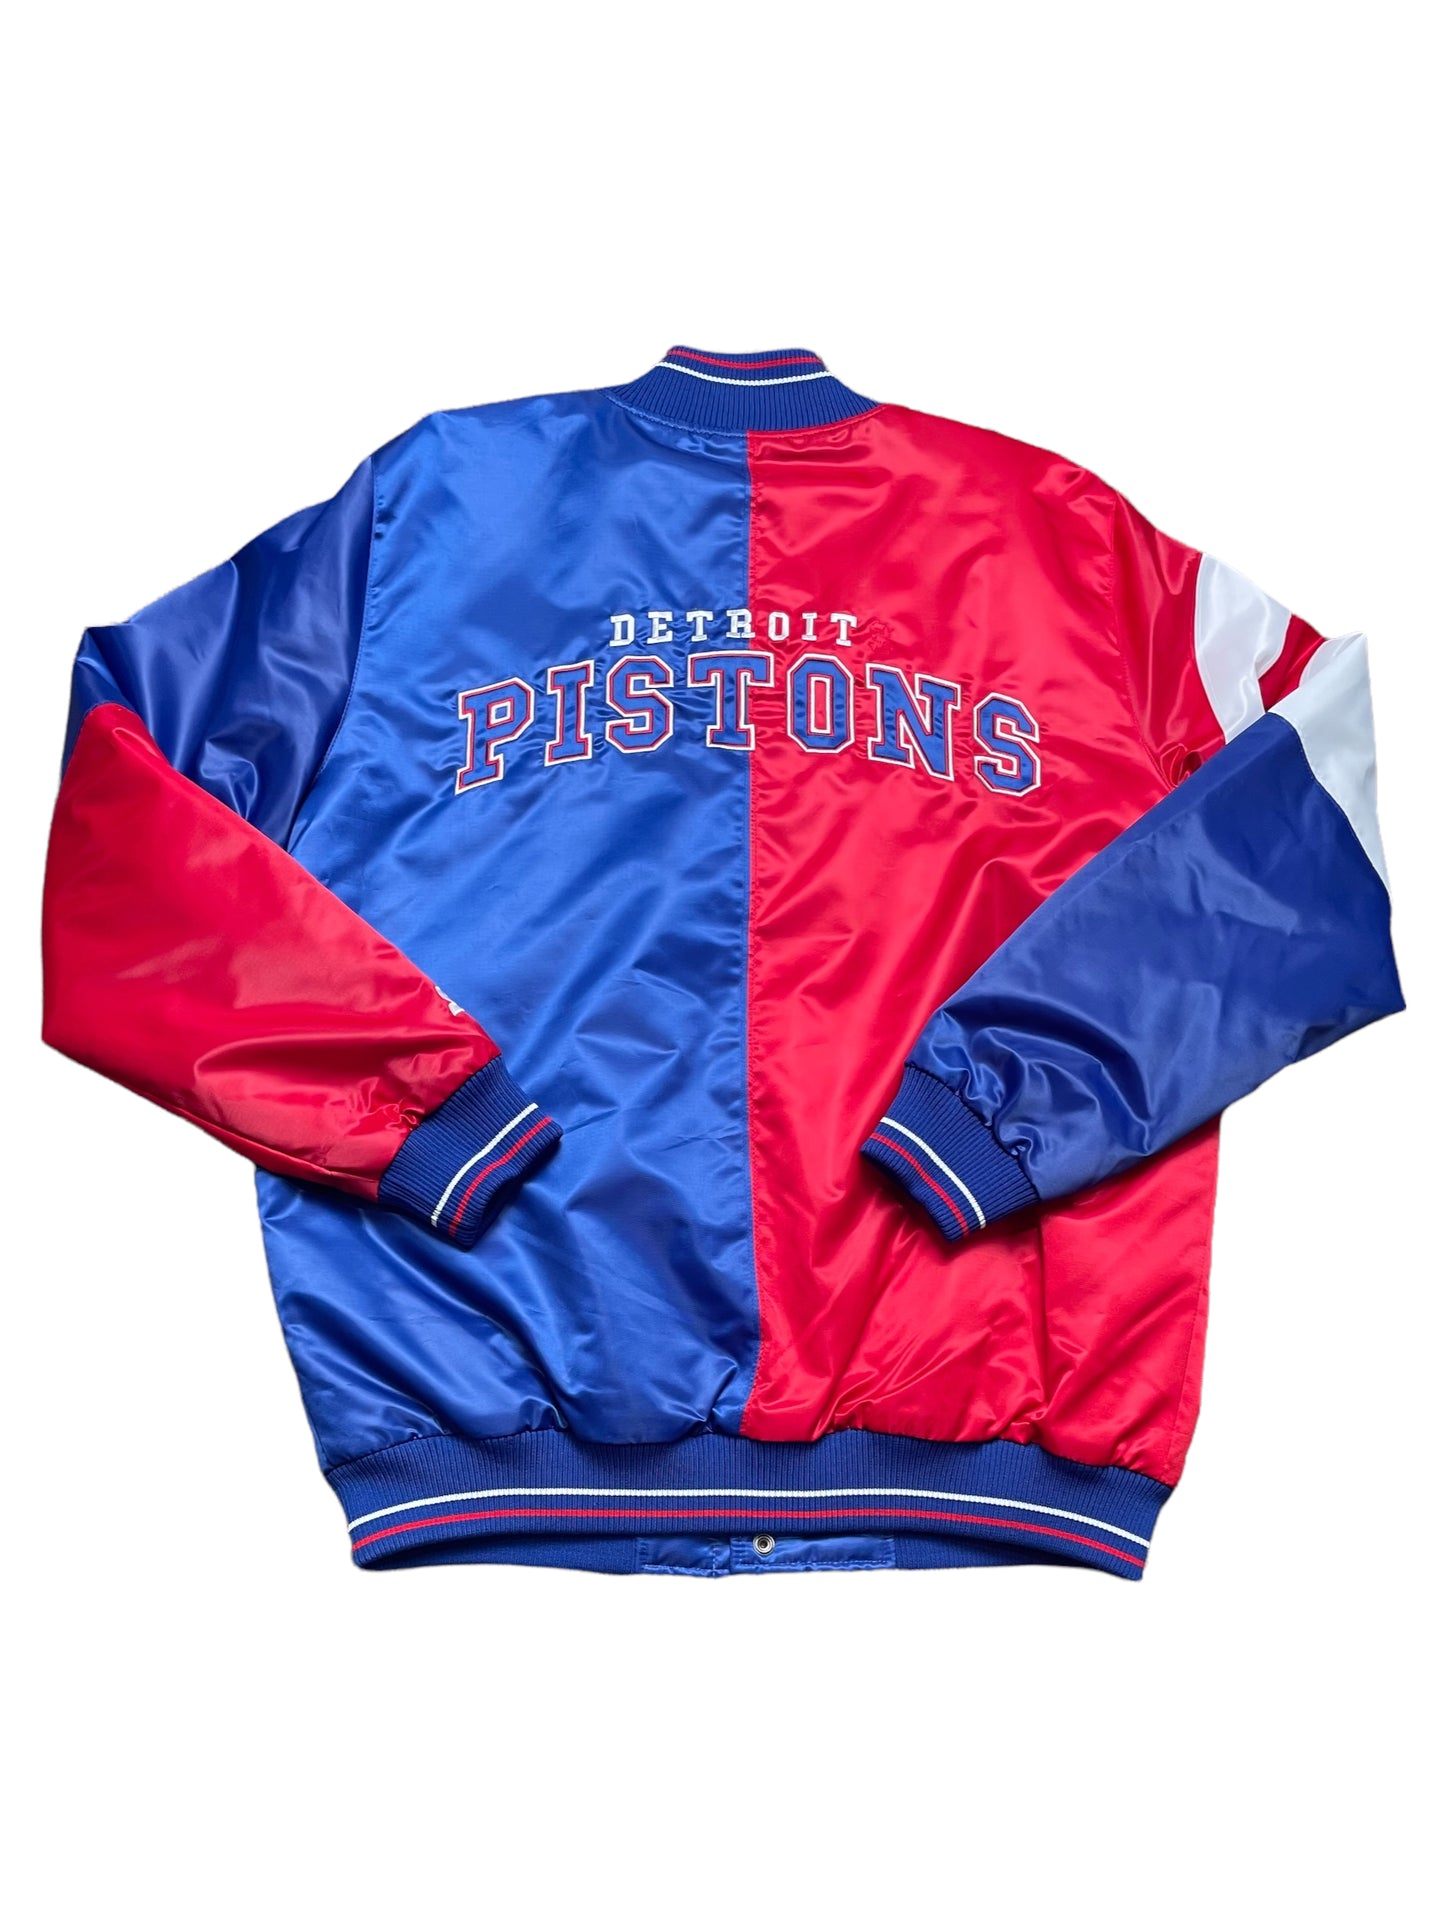 New With Tags Detroit Pistons Starter Jacket Large